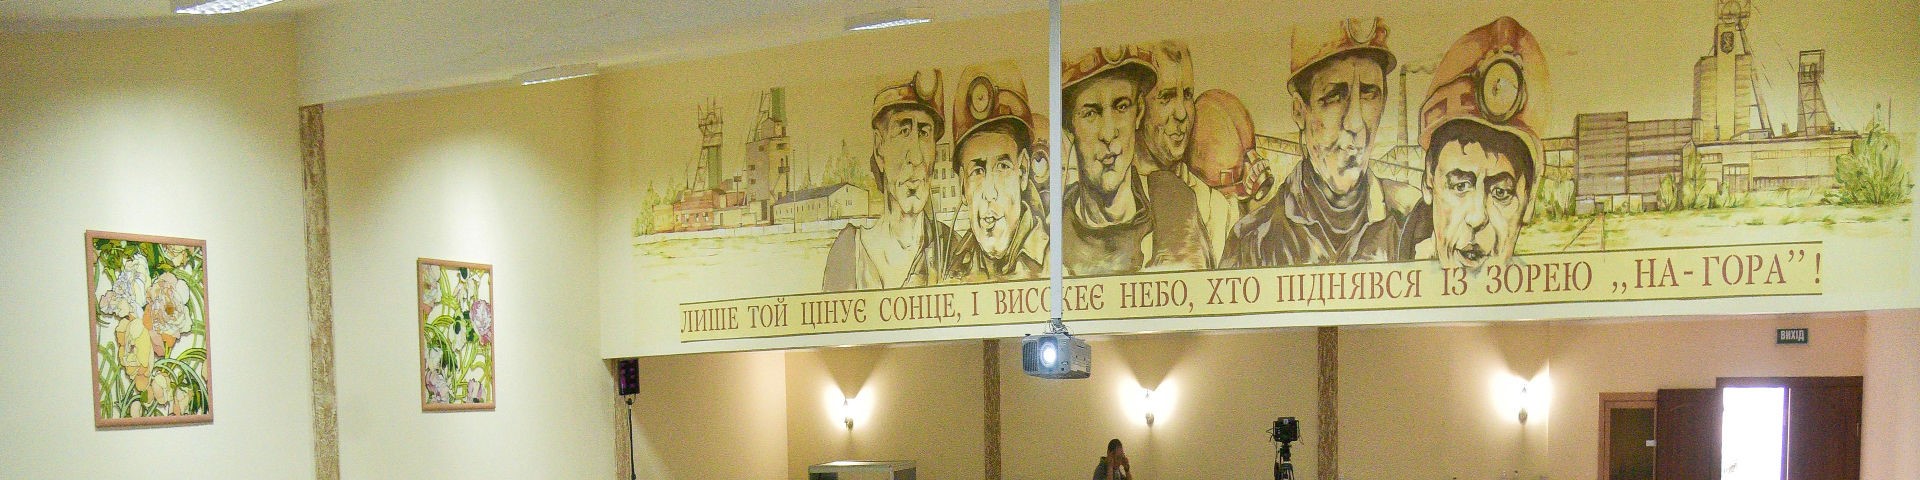 A mural in a meeting hall depicts workers at a coal mine.